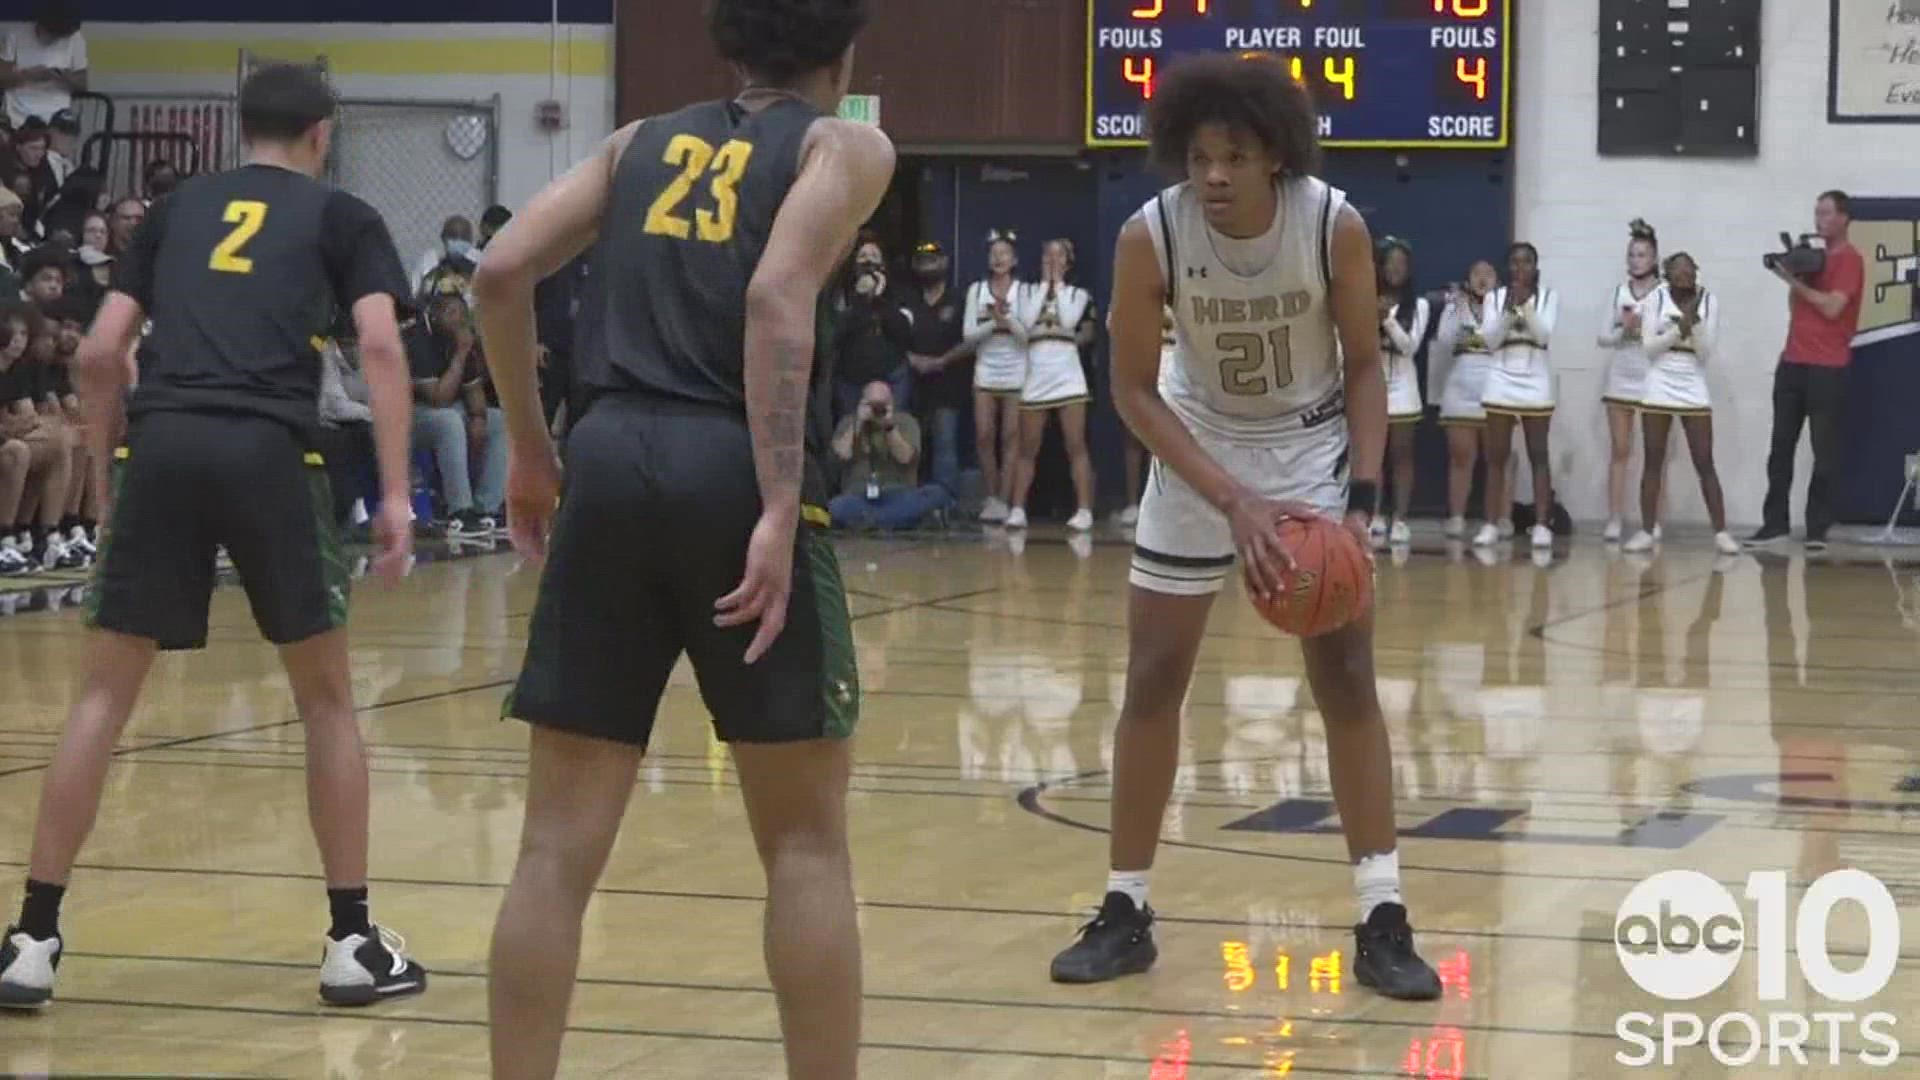 Ameere Britton scored 27 points and Karlos Zepeda buried two three's down the stretch to lead the Elk Grove Thundering Herd to the CIF Div. II NorCal Regional Finals